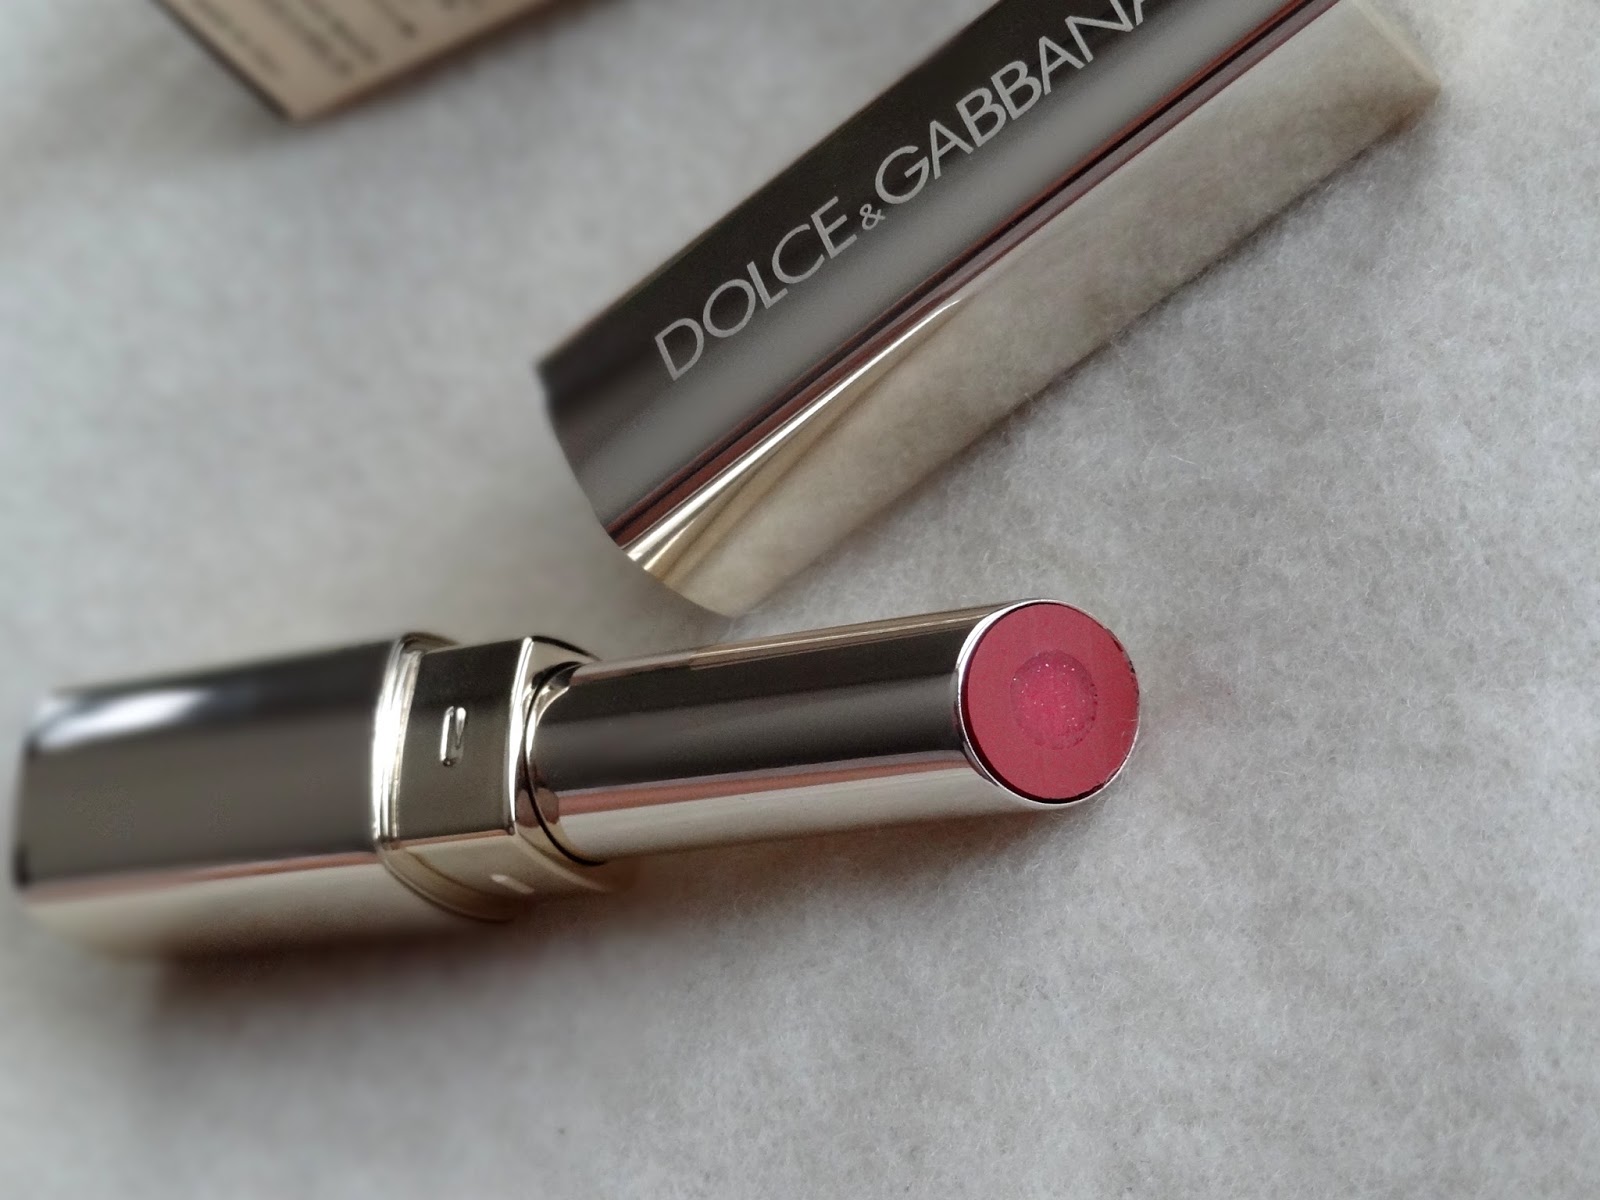 dolce & gabbana passion fusion gloss duo lipstick in 230 iridescent review, photos & swatches